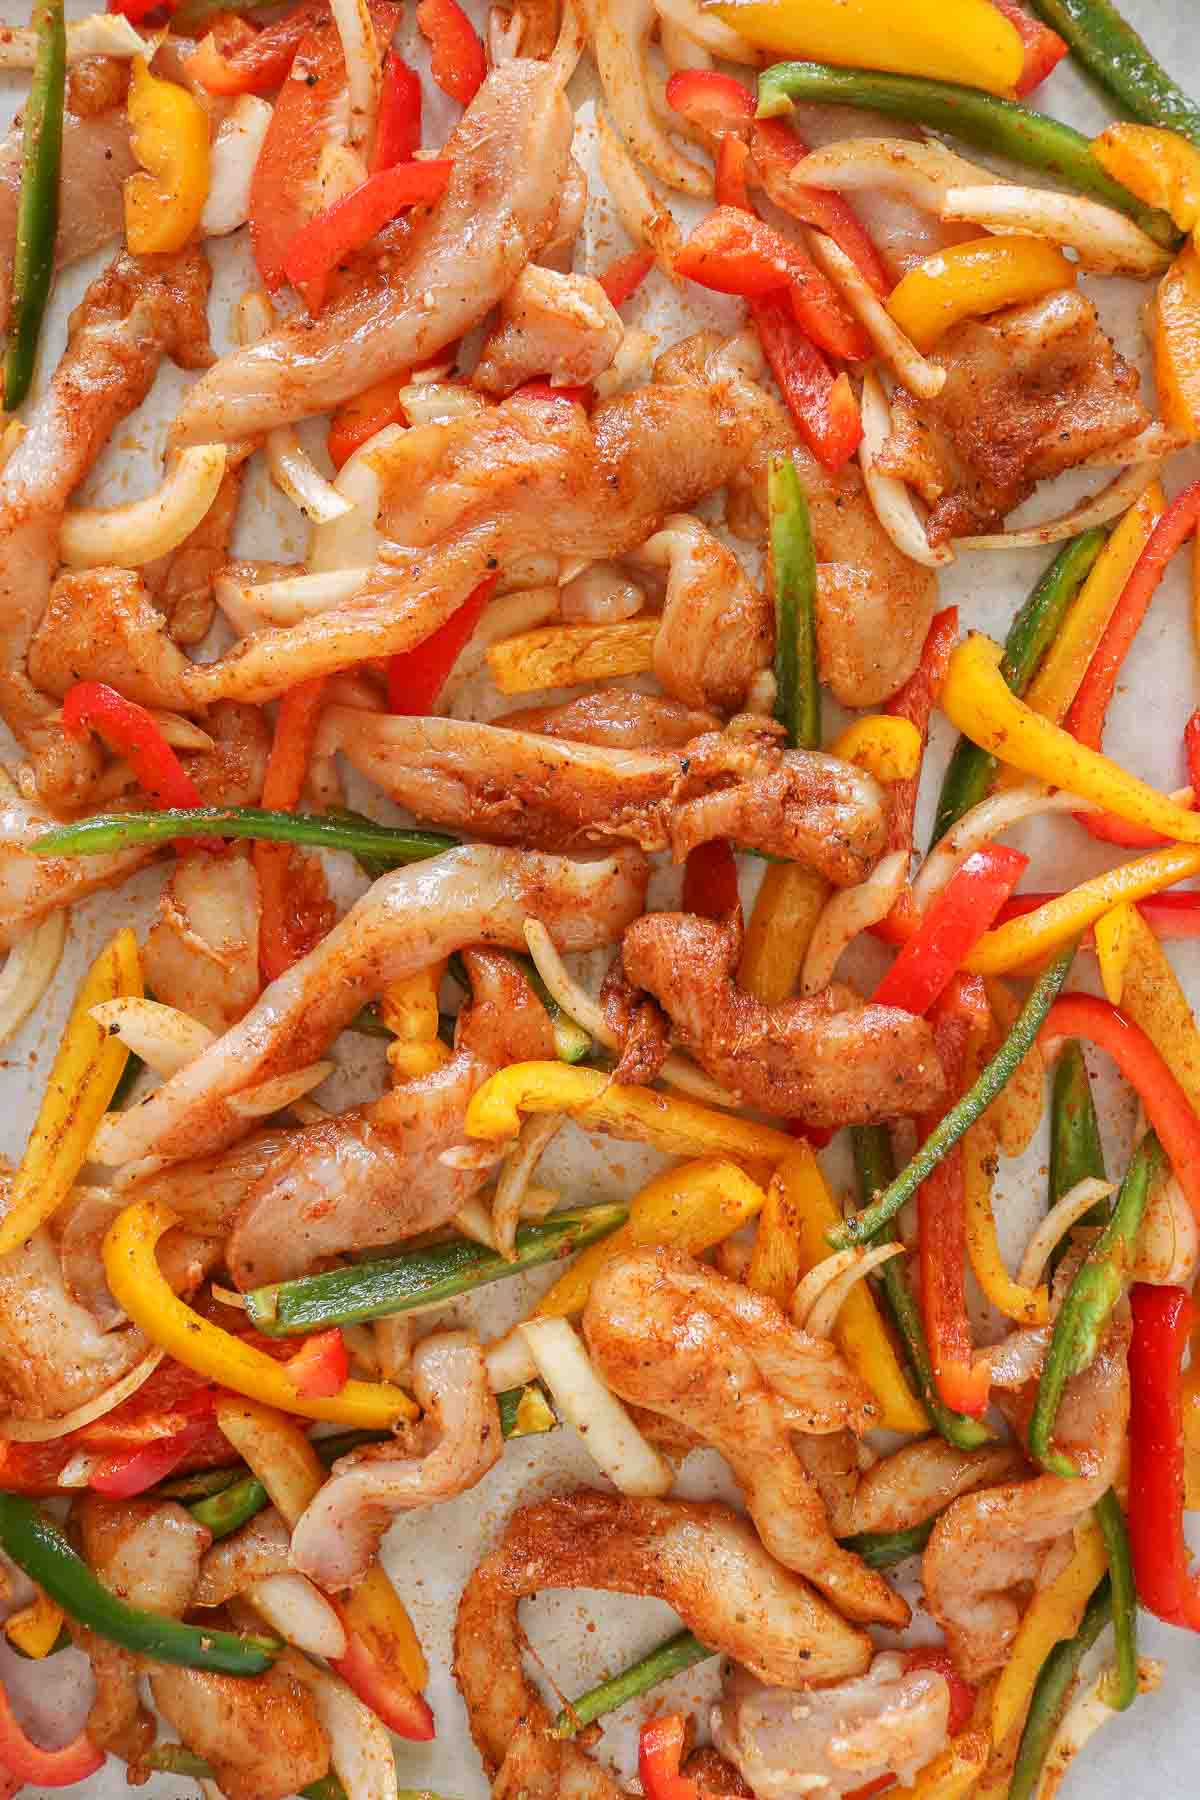 Seasoned chicken, onion and peppers for fajitas on a sheet pan before cooking.